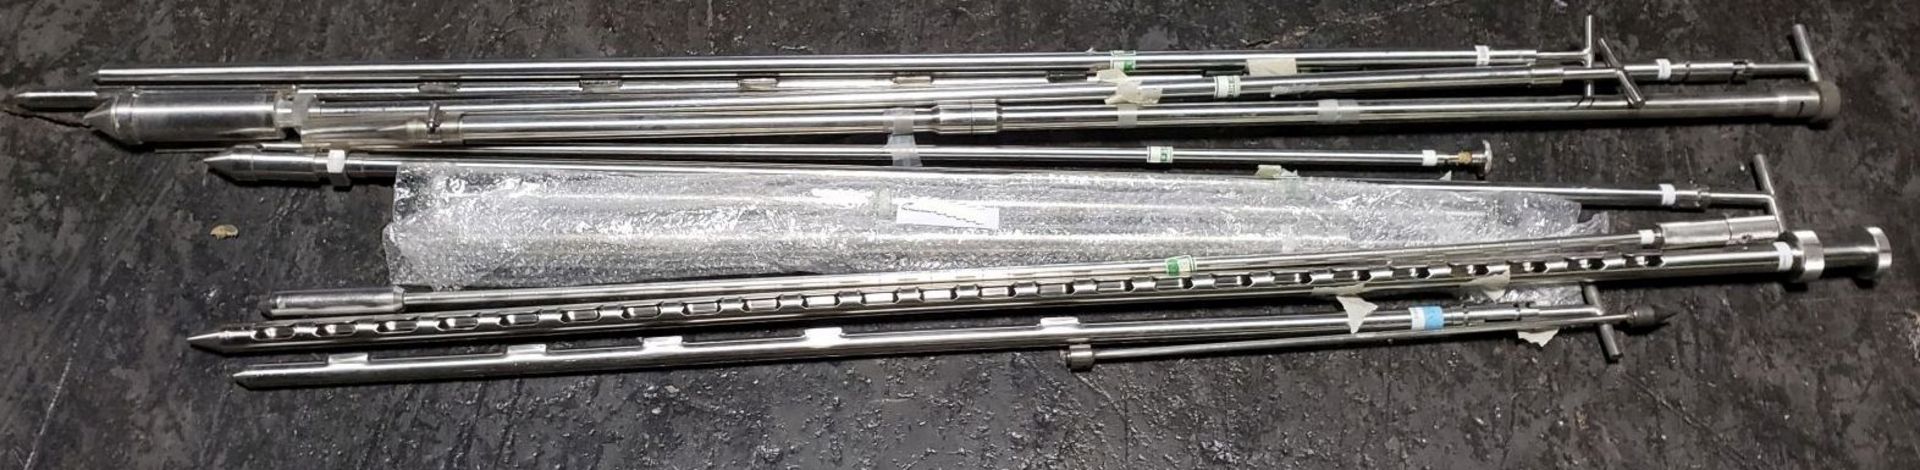 Lot of Stainless Steel Sample Theives, as pictured